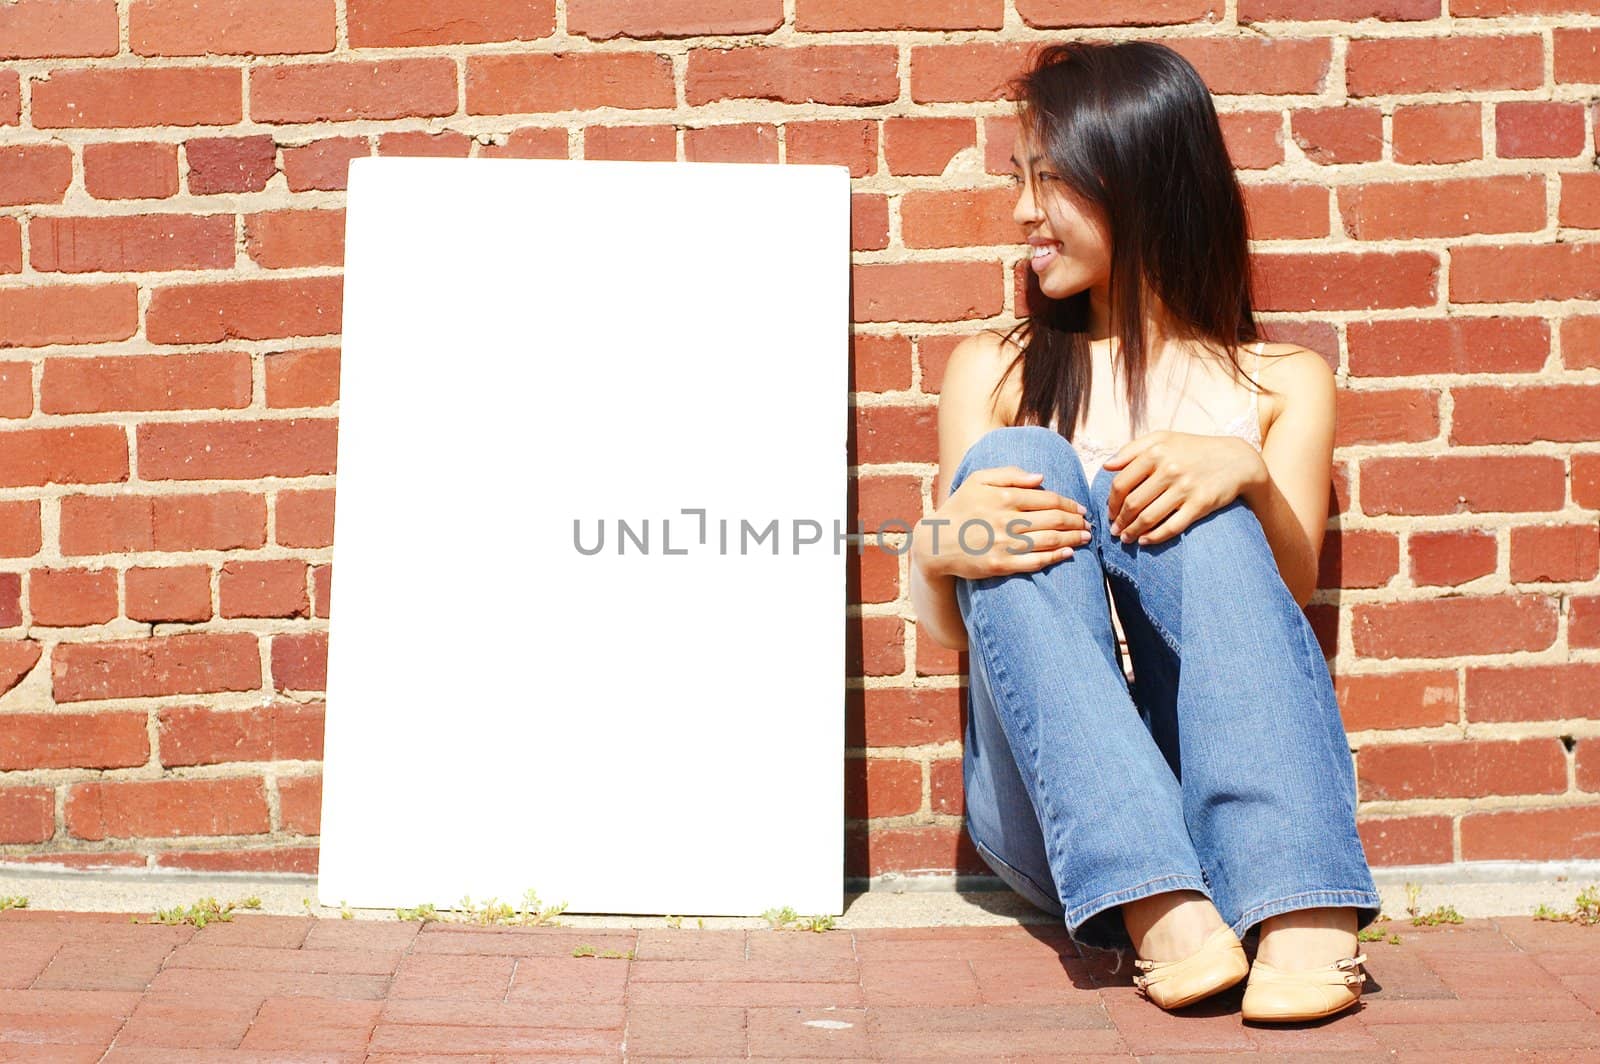 Fashionable girl with blank white poster against brick wall.